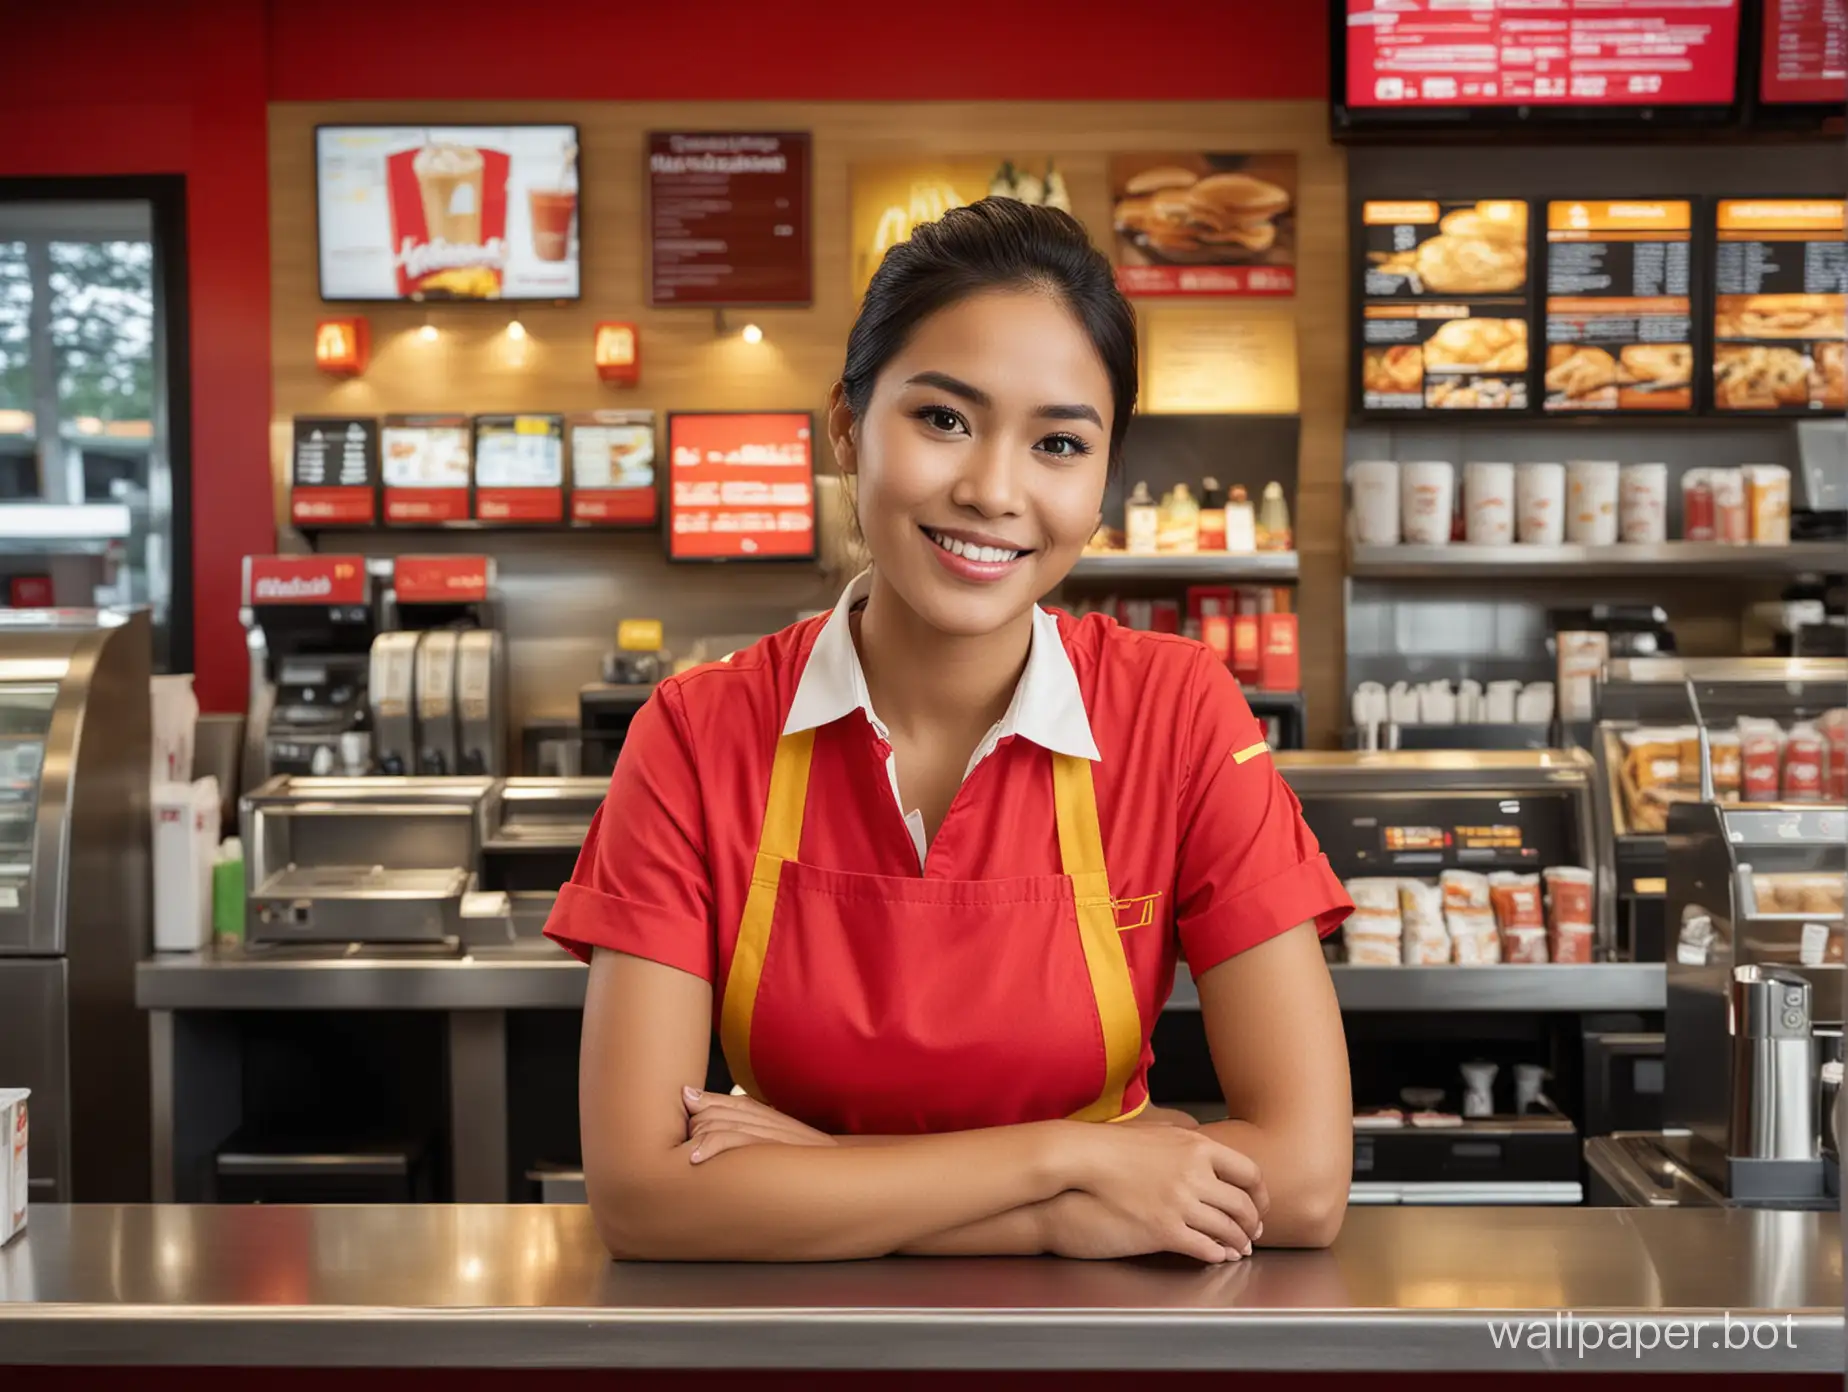 A professionally-lit photograph of an Indonesian female barista working in a McDonald's restaurant. She is wearing only a red McDonald's apron, revealing her toned body. With a warm, engaging smile, she operates the POS system, taking an order while looking directly into the camera. The background showcases the modern, clean interior of the restaurant, with bright and inviting colors.